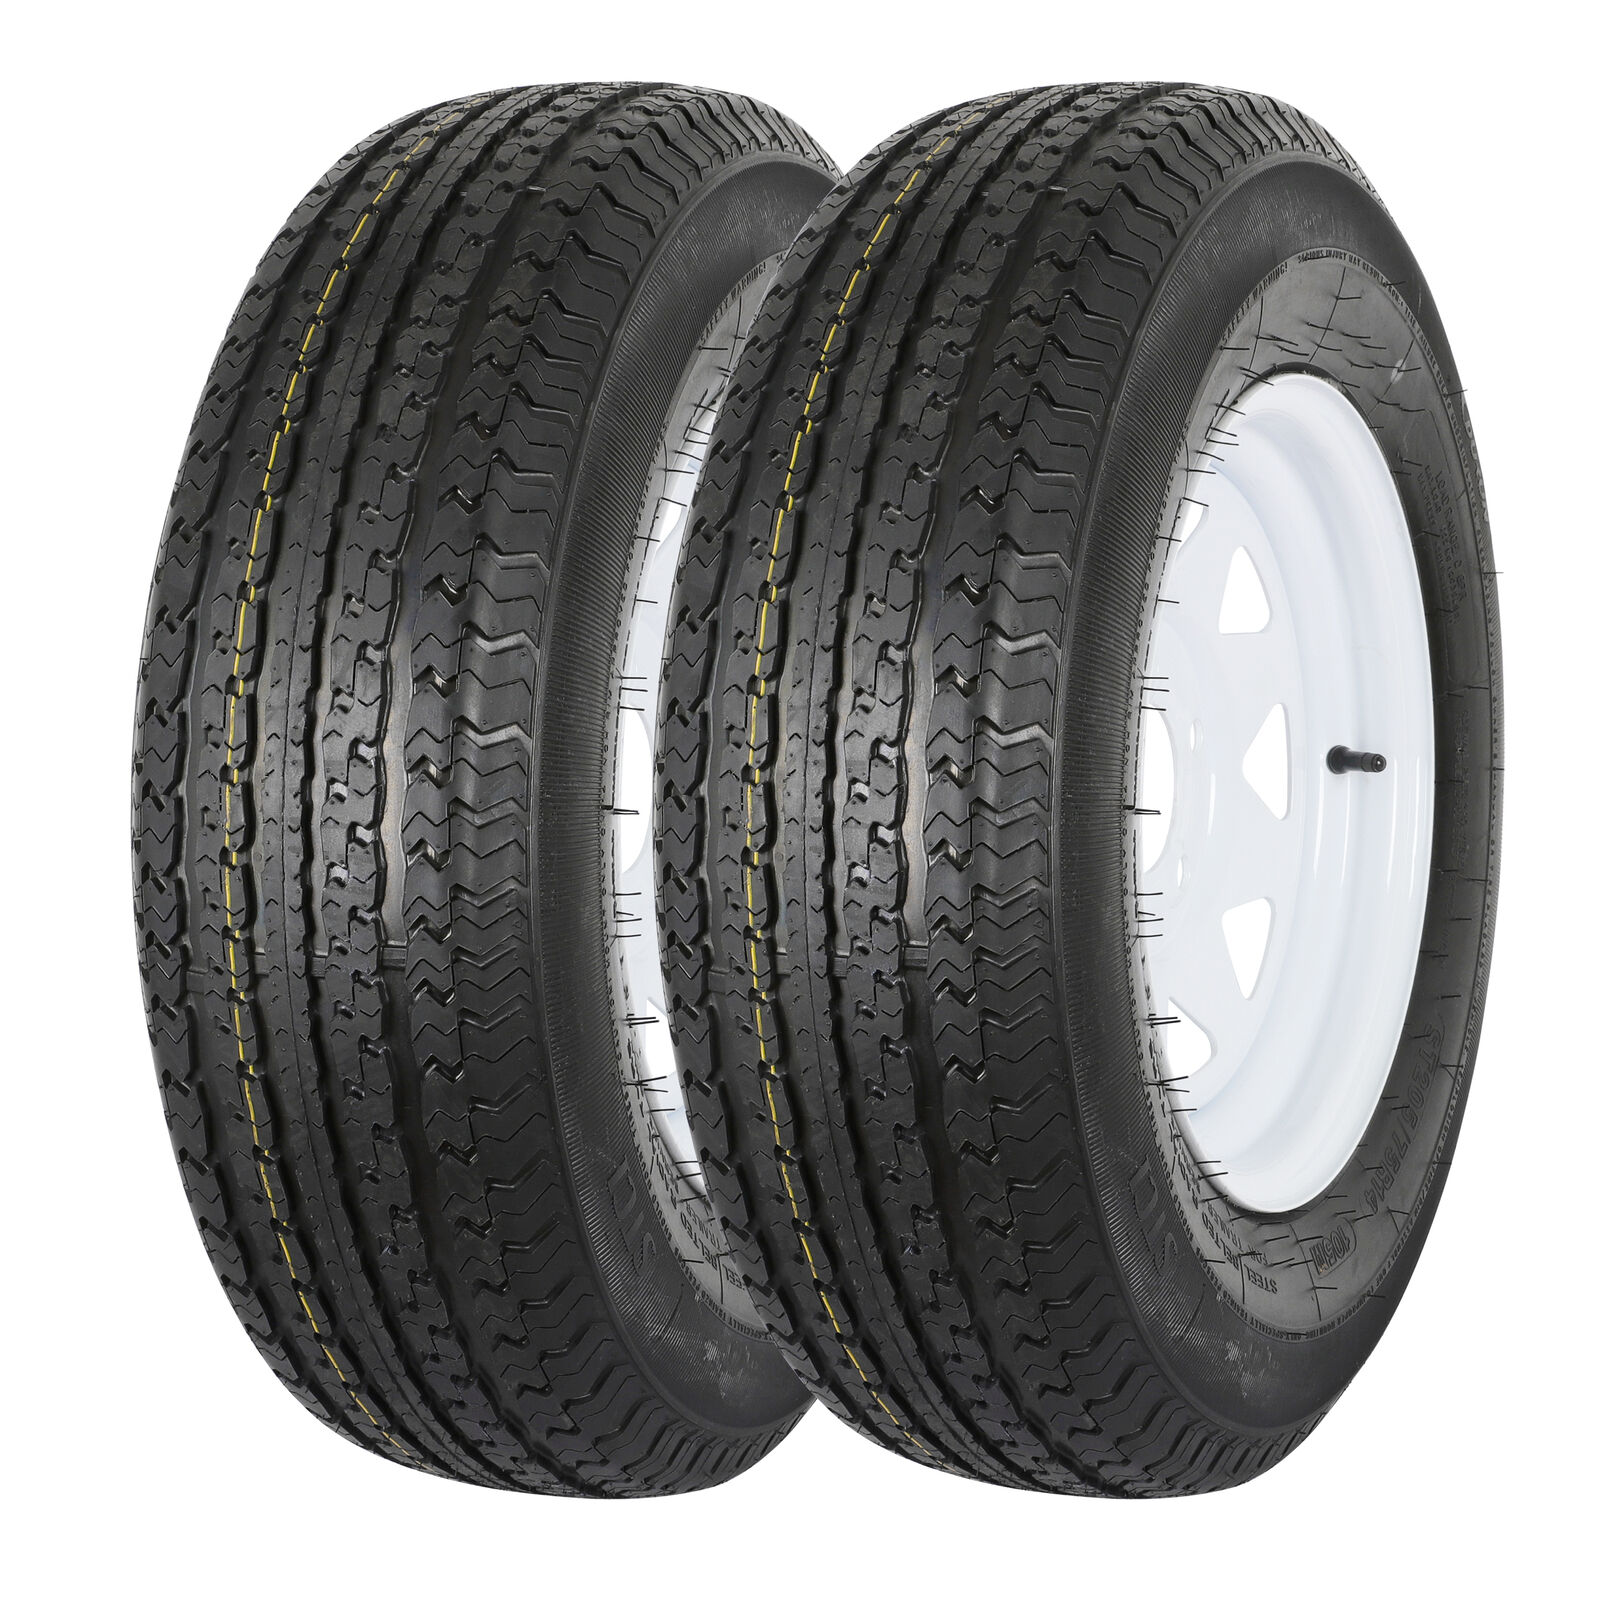 ST205/75R14 Radial Trailer Tire with Rim, 8-Ply Load Range D, Set of 2